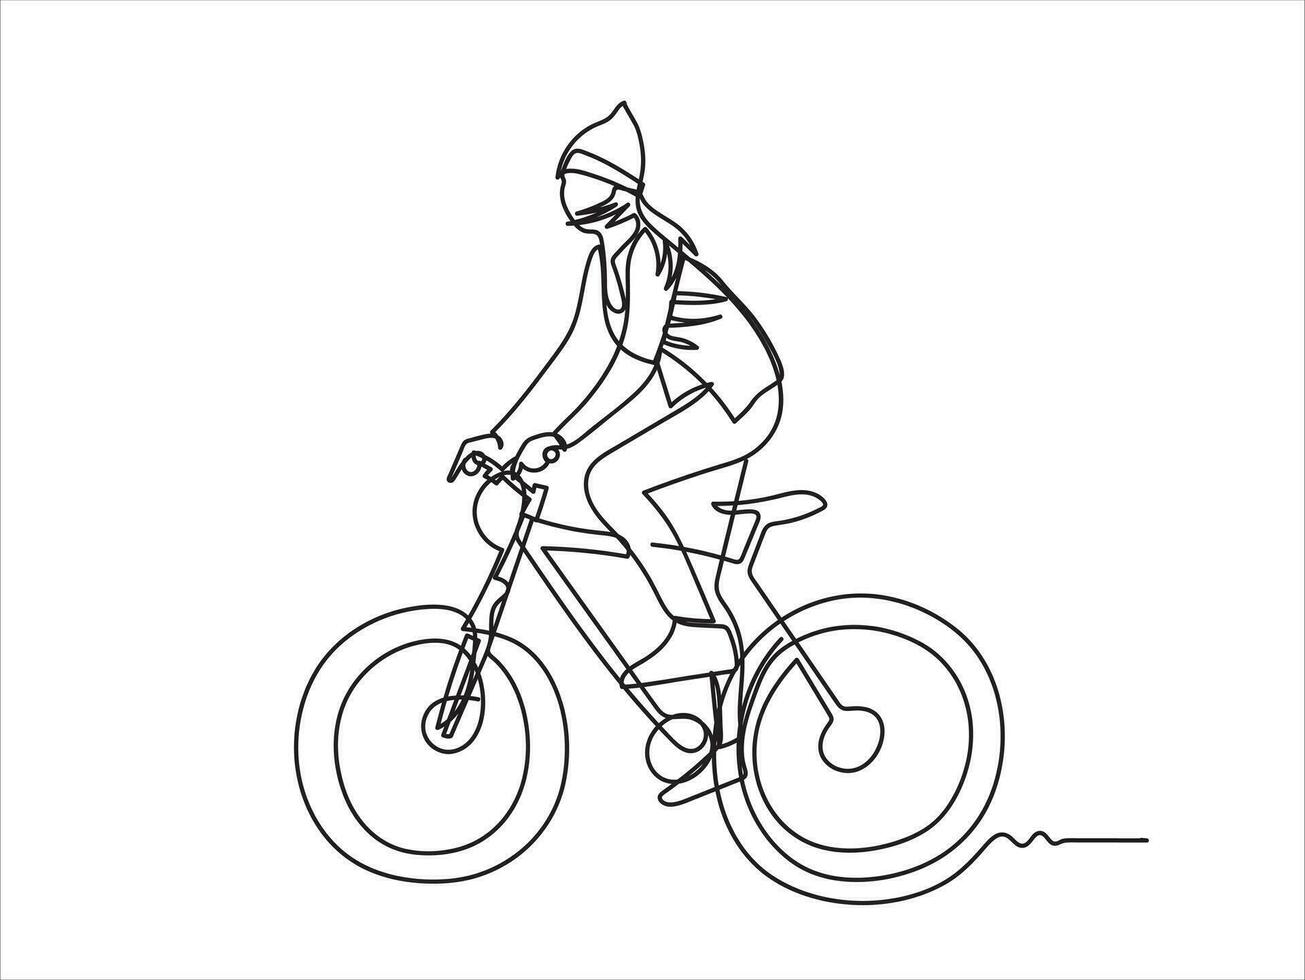 Drawing happy people riding bicycle world bicycle day concept continuous line drawing vector illustration